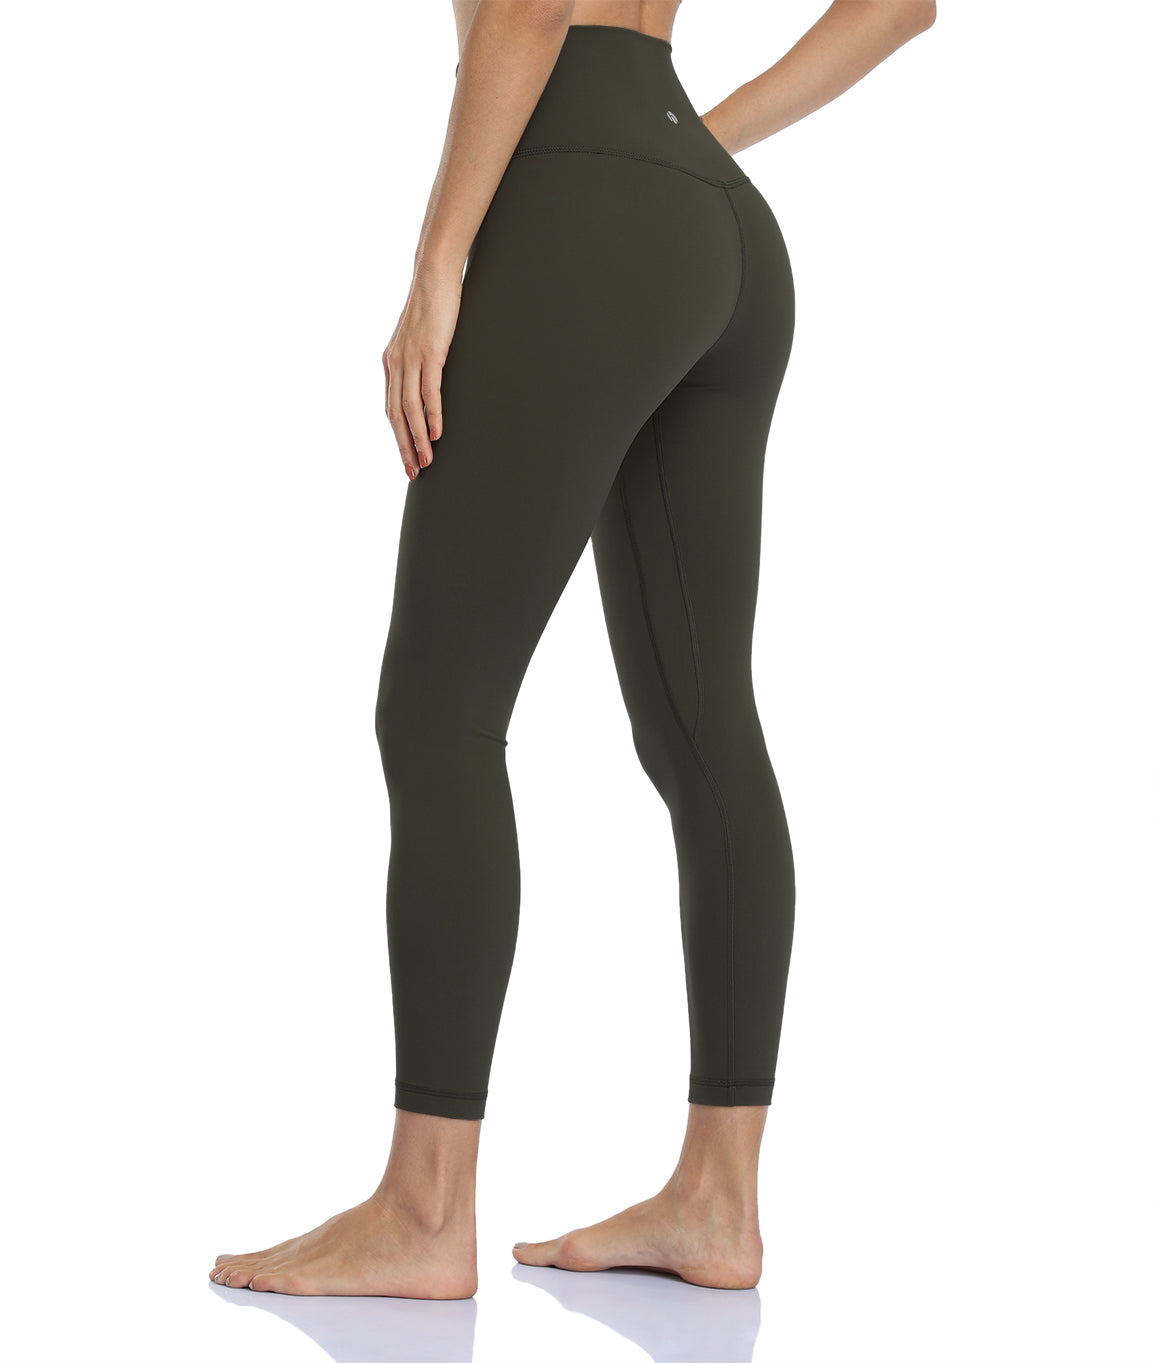  HeyNuts Essential High Waisted Yoga Leggings For Tall Women,  Buttery Soft Full Length Workout Pants 28 Java Coffee XS